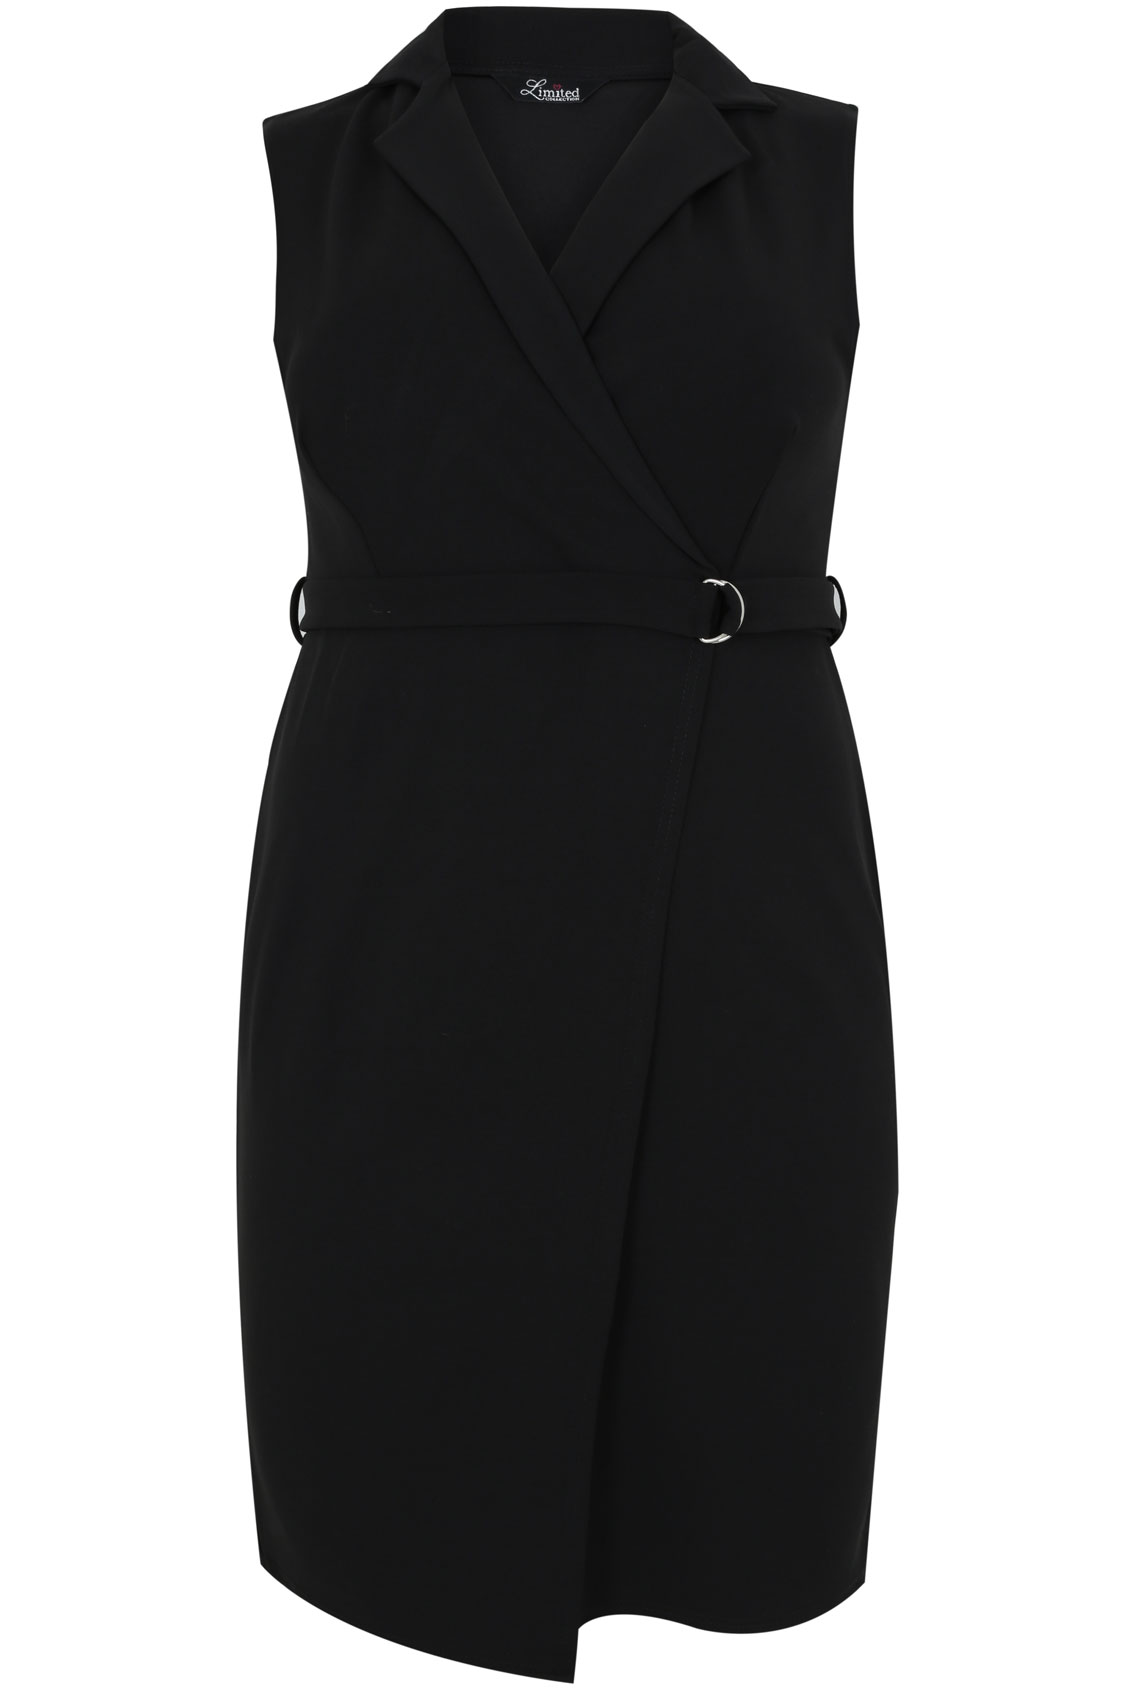 Black Sleeveless Wrap Front Dress With Collar Plus Size 14 to 28